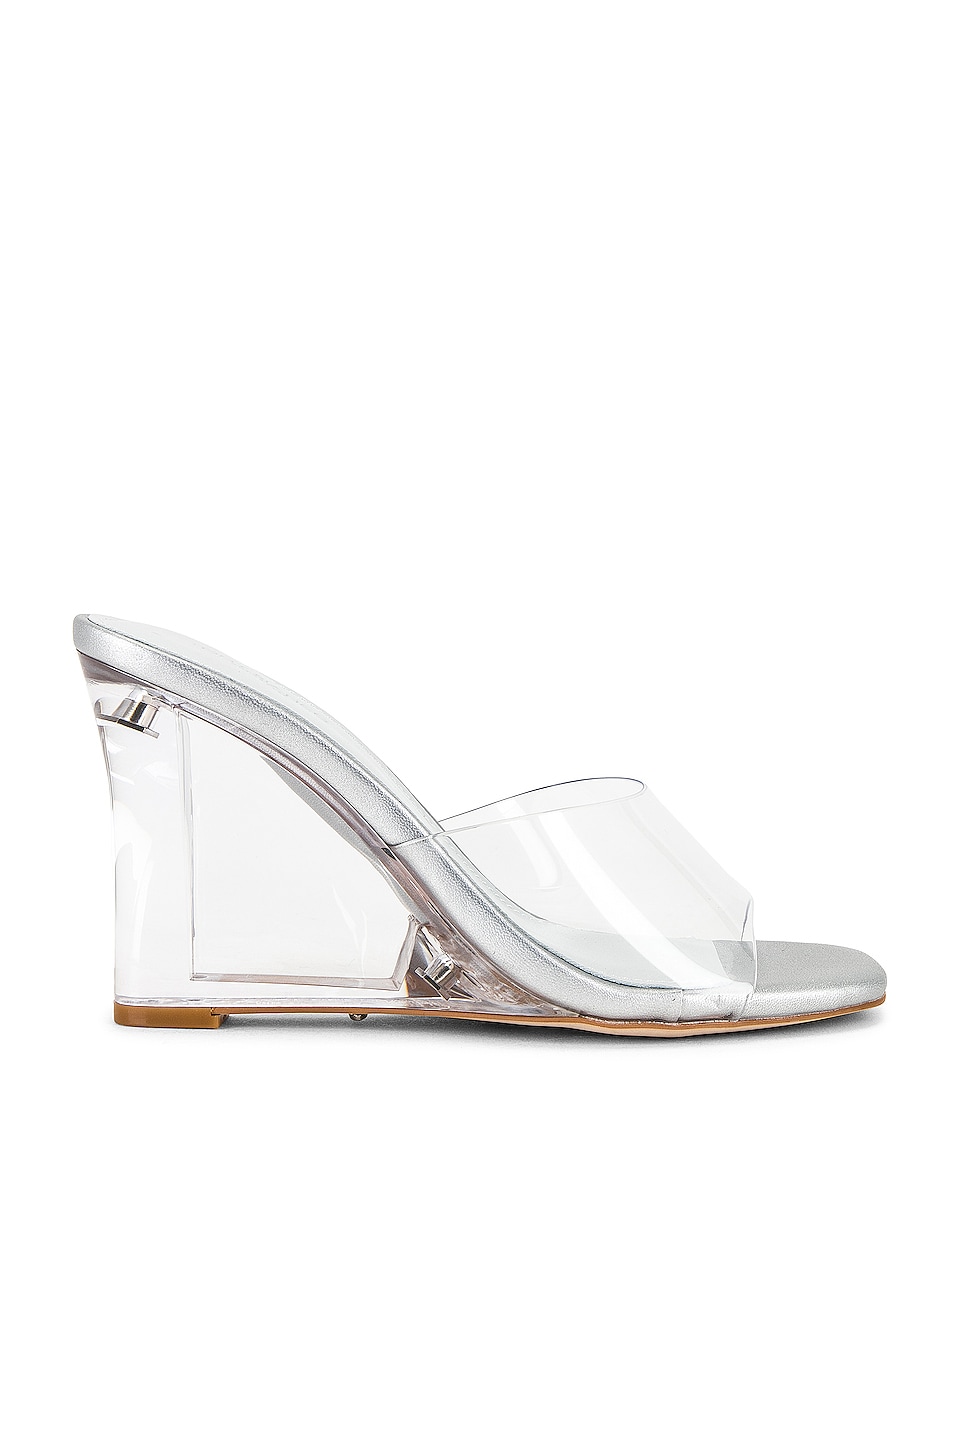 Silver jelly wedge sandals